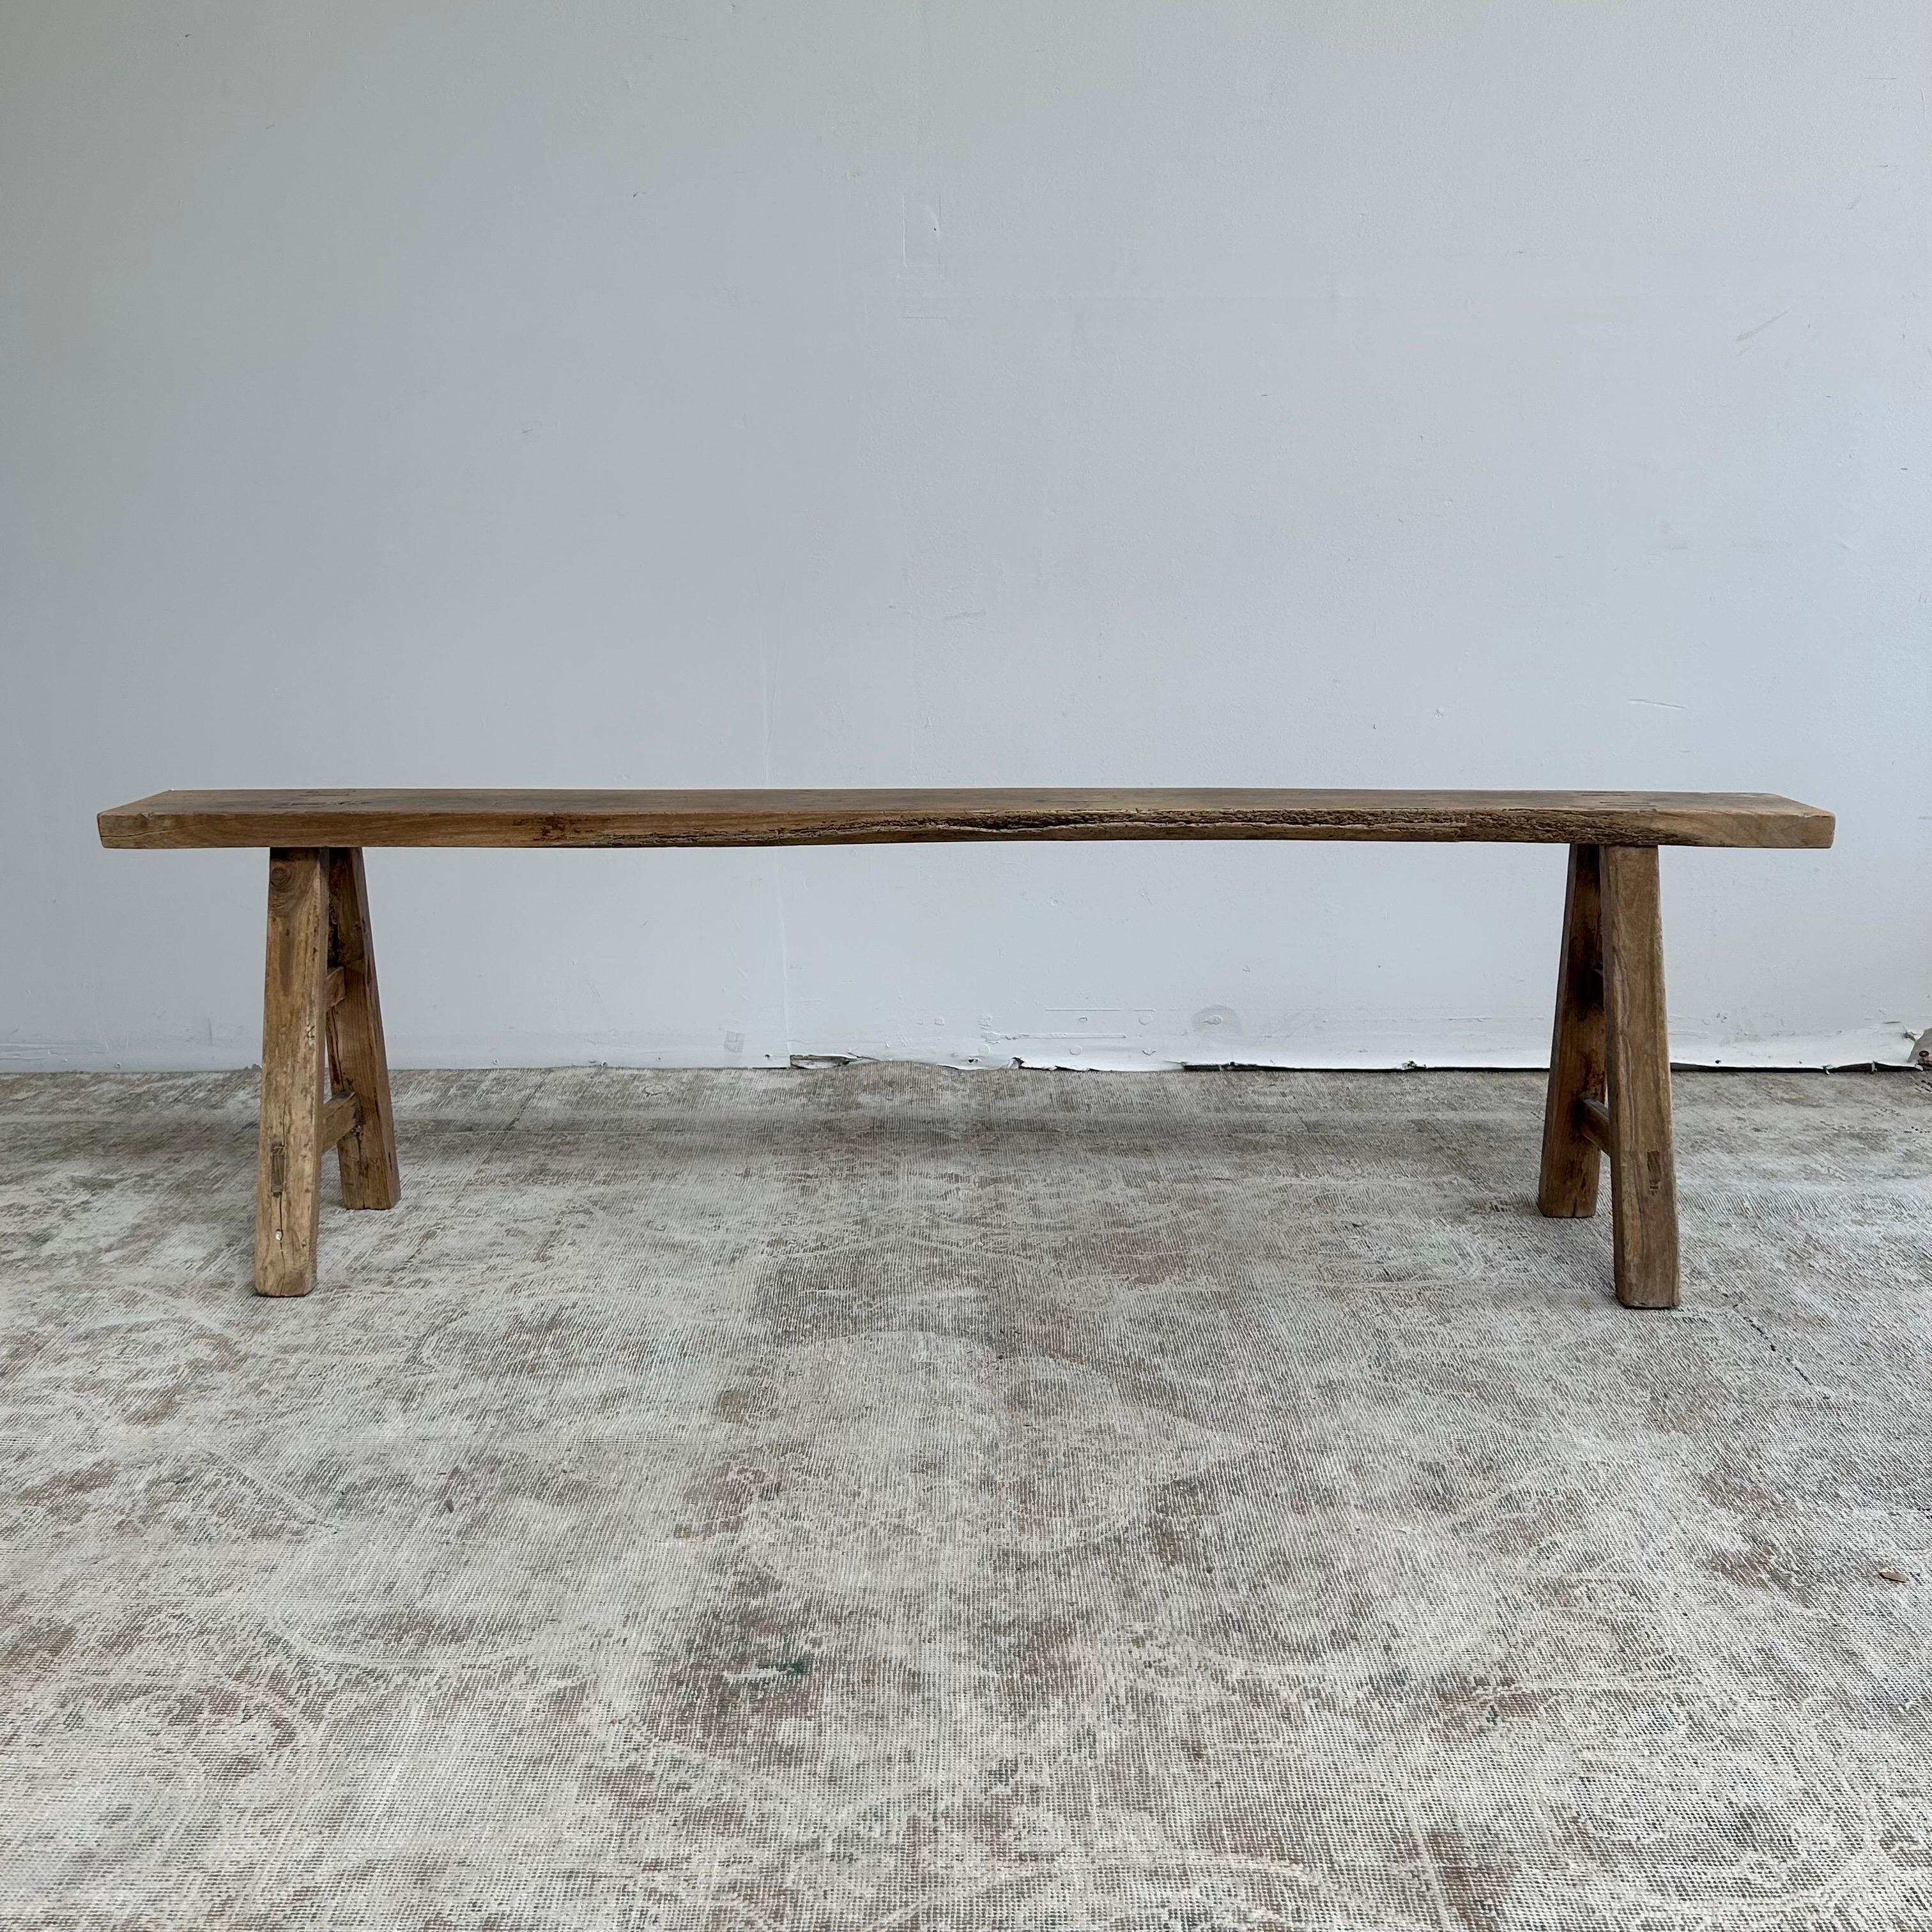 These are the real vintage antique elm wood benches! Beautiful antique patina, with weathering and age, these are solid and sturdy ready for daily use, use as a table behind a sofa, stool, coffee table, they are great for any space. Each piece is